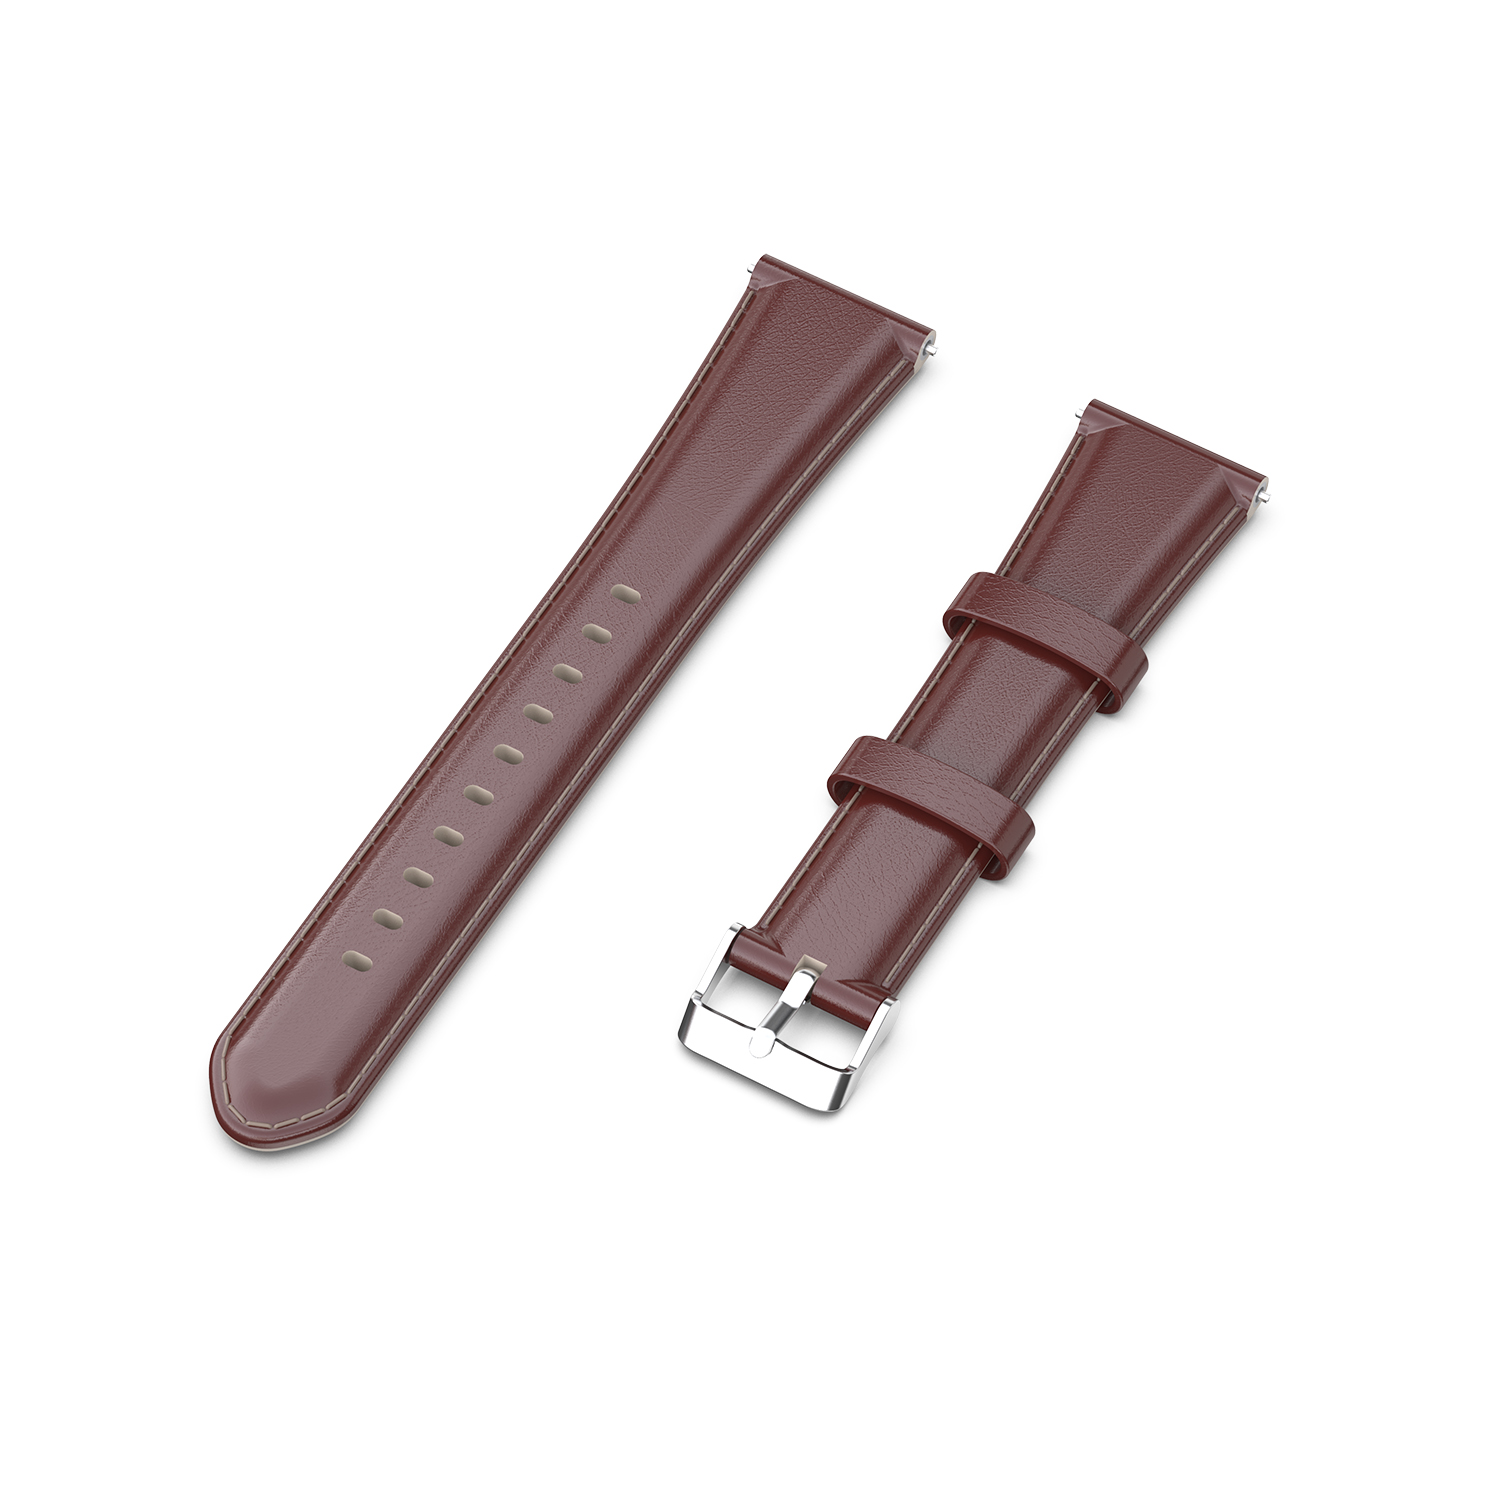 Bakeey-22mm-Genuine-Leather-Replacement-Strap-Smart-Watch-Band-For-Amazfit-GTR-47MM-1786519-24